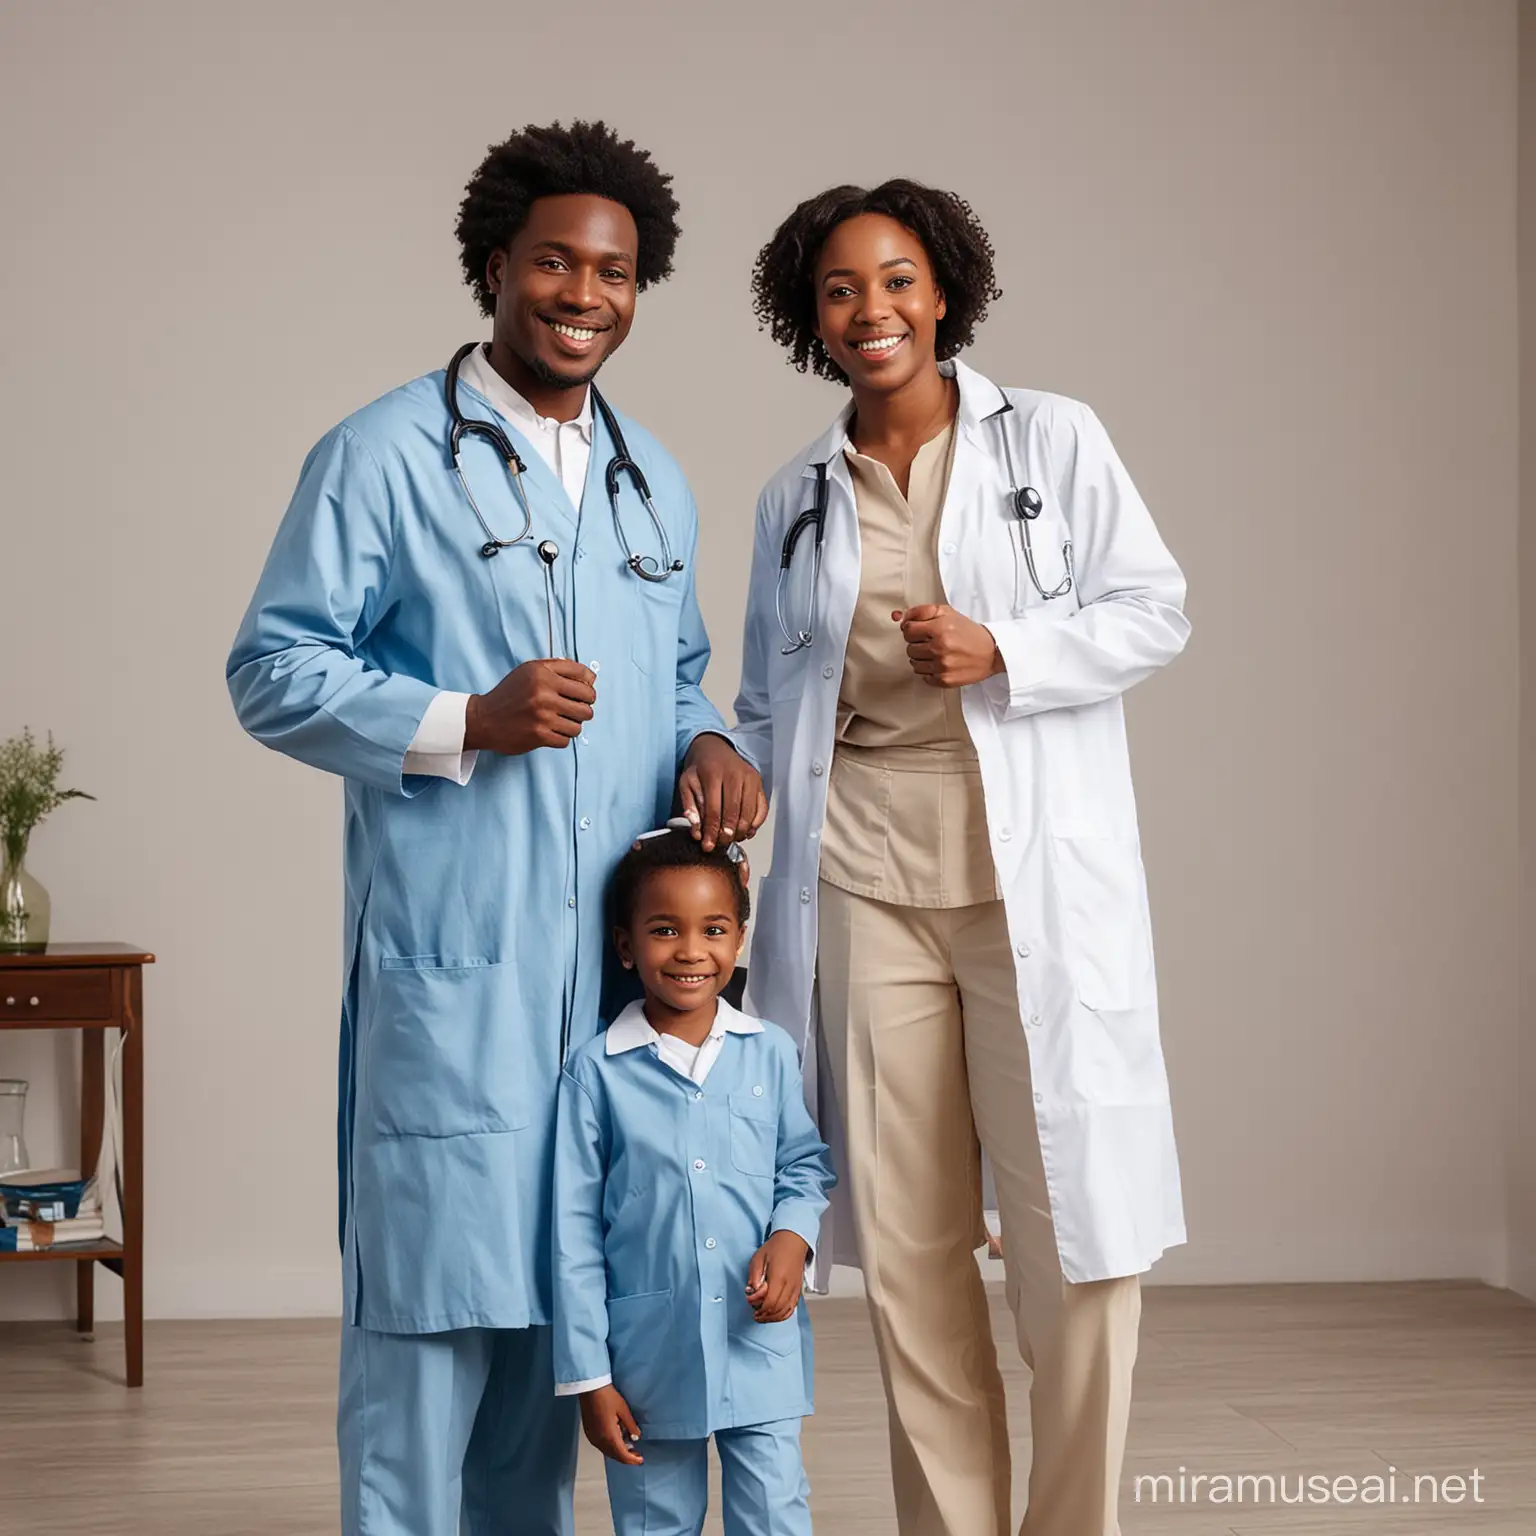 Joyful African Family RolePlaying Child Dressed as a Doctor with Parents